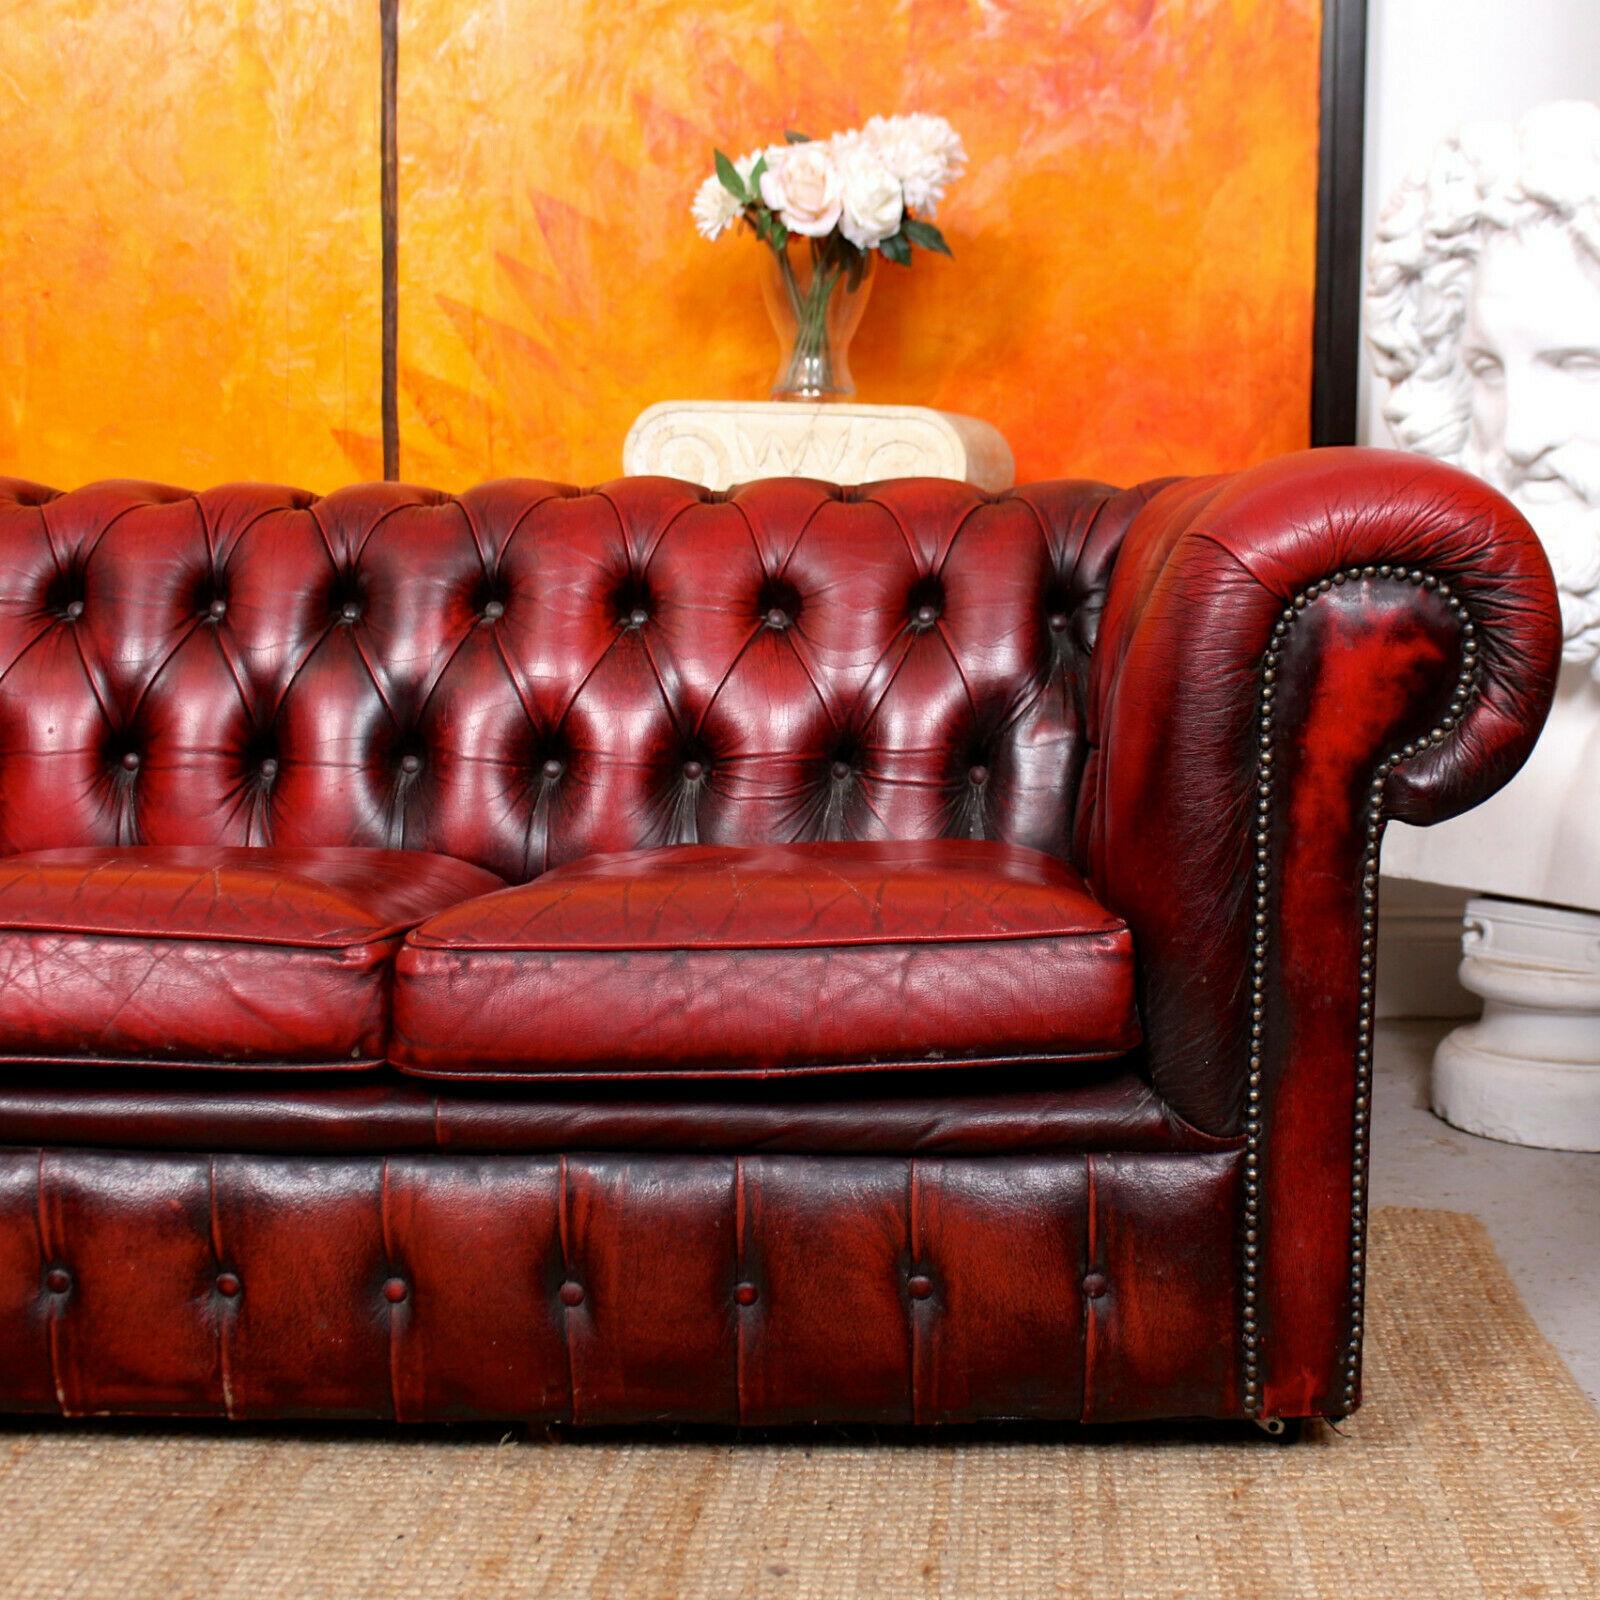 RED LEATHER CHESTERFIELD 3 SEATER SOFA     DELIVERY AVAILABLE 